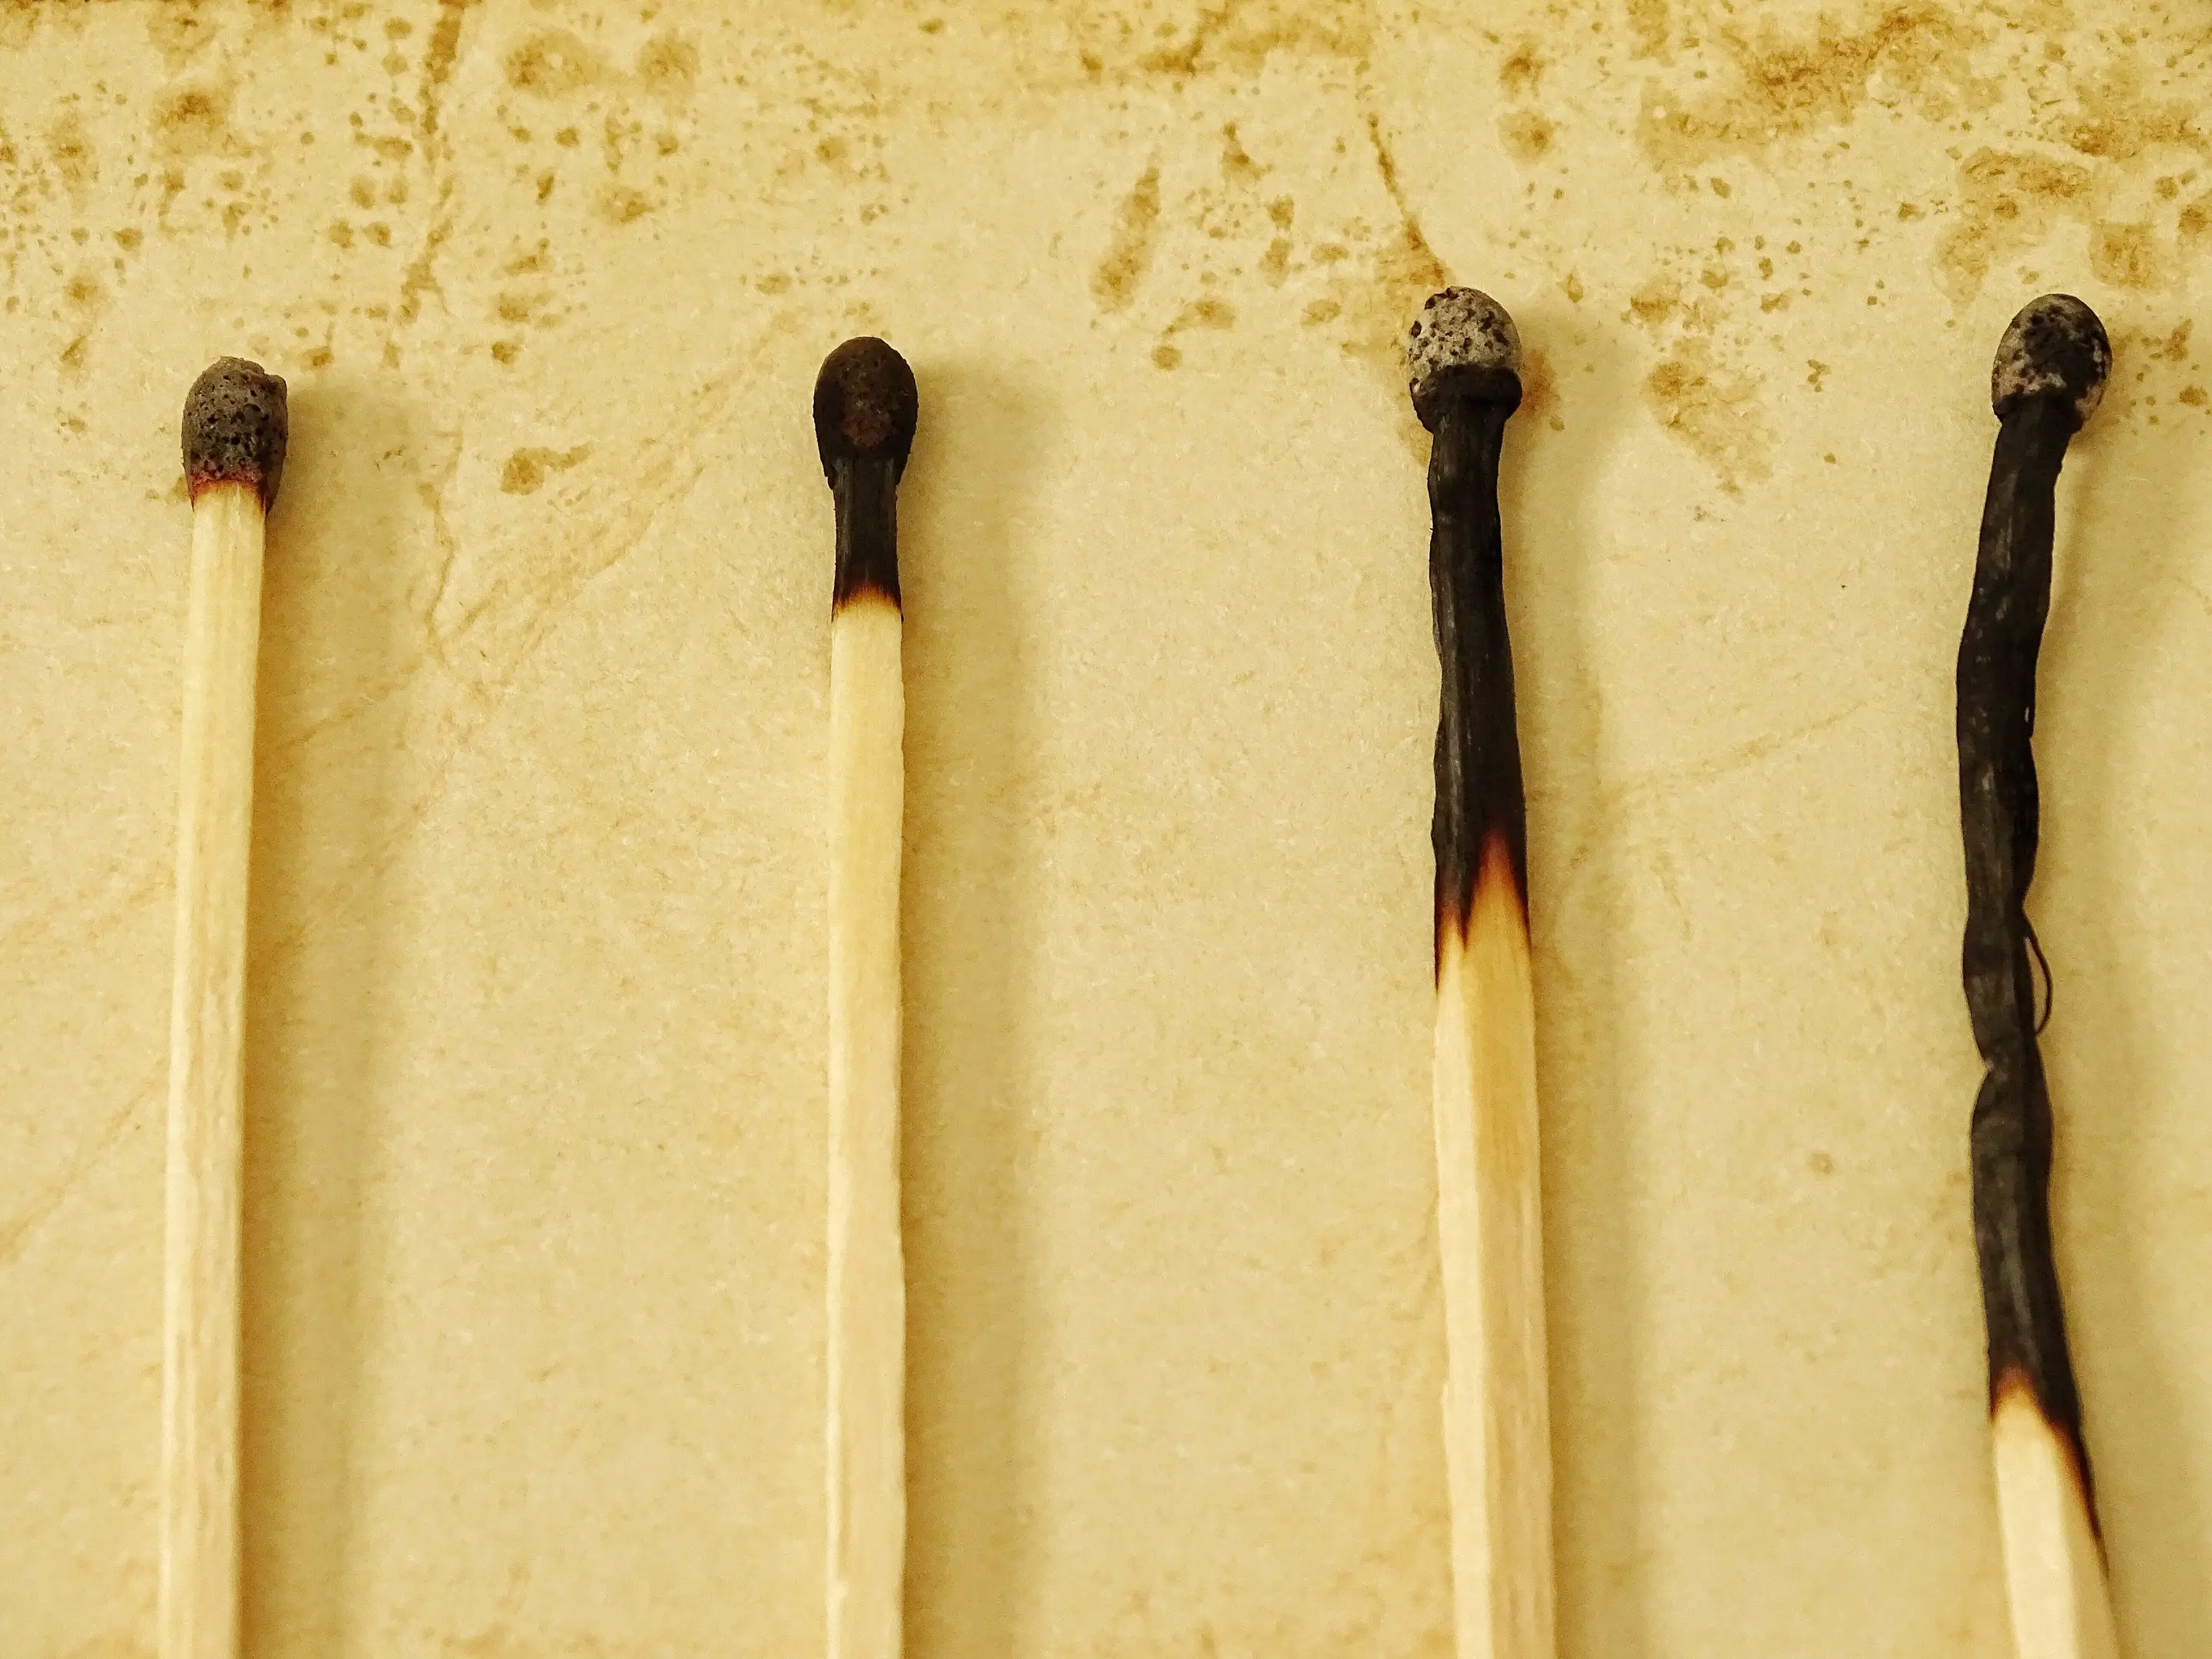 A set of four matches. The left match is the least burnt and they get increasingly more burnt from left to right.